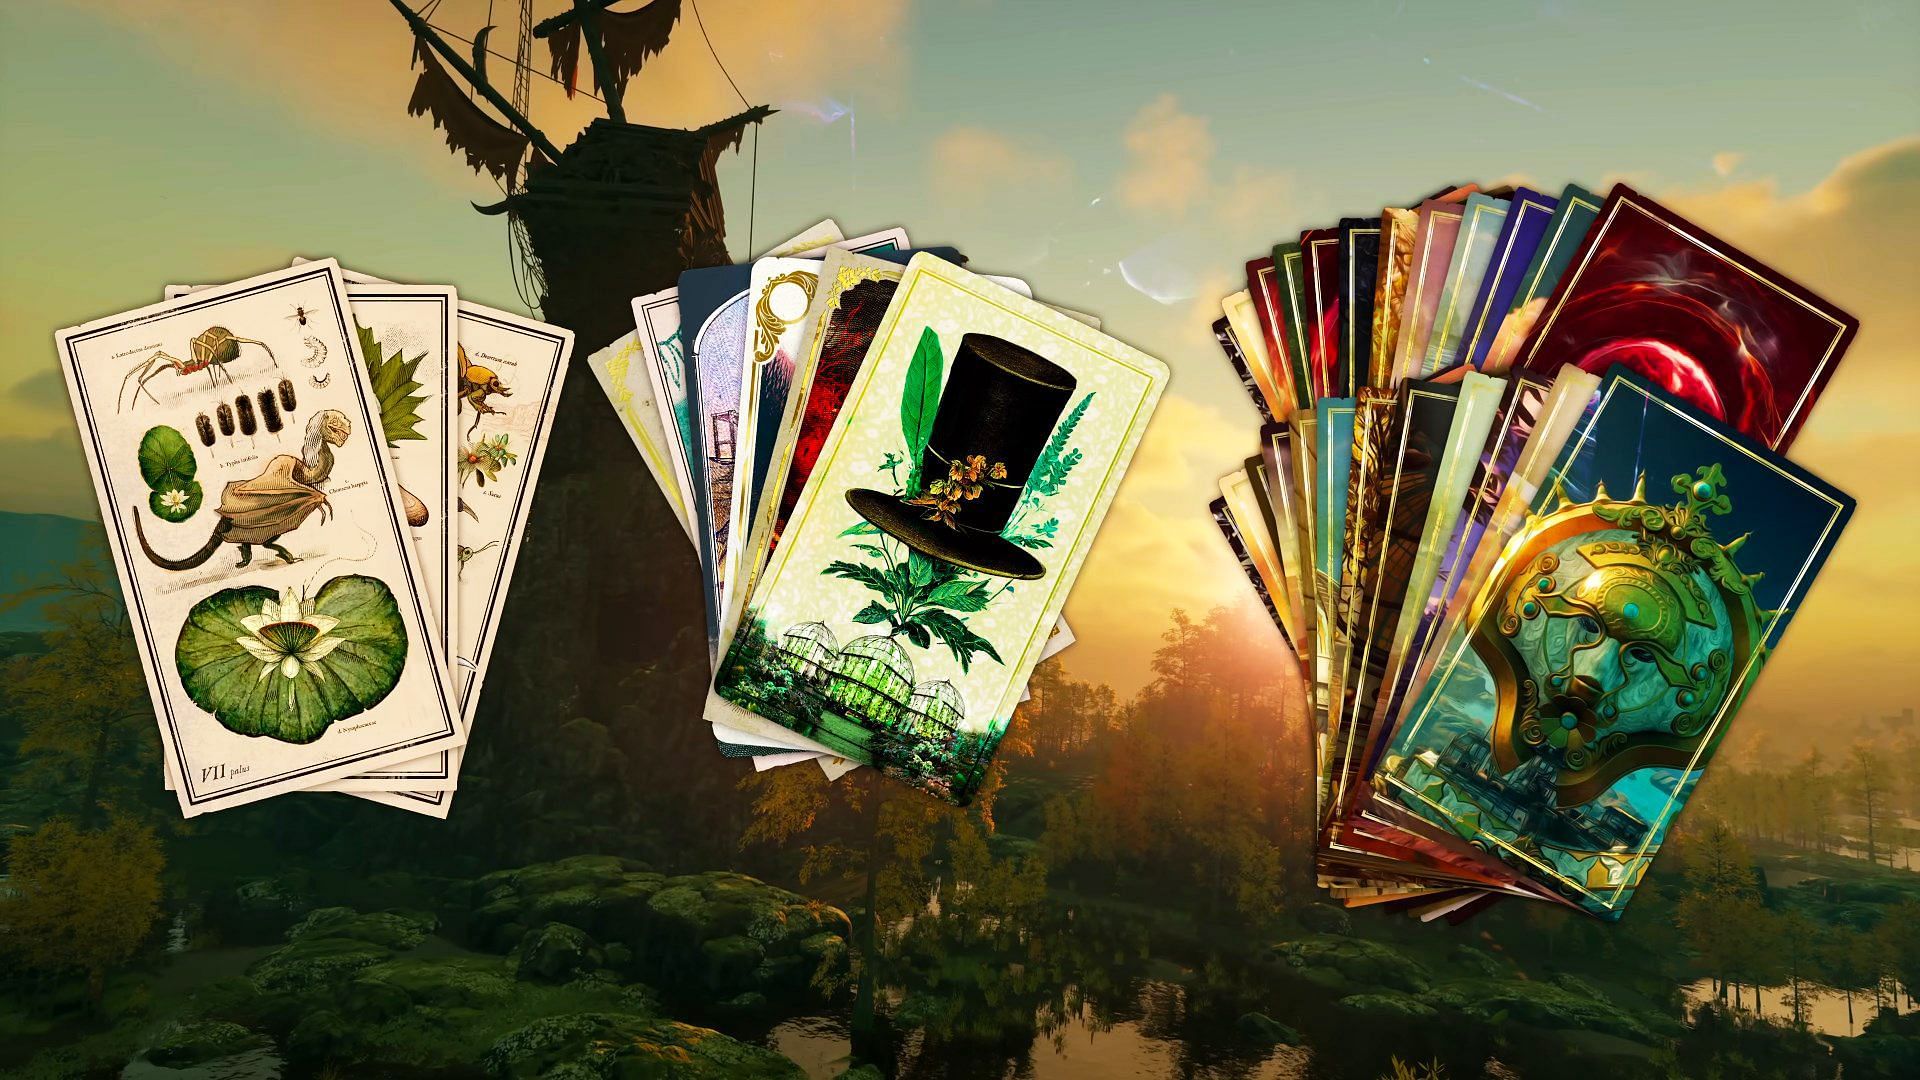 The game uses a card system to travel across different realms. (Image via Inflexion Games)